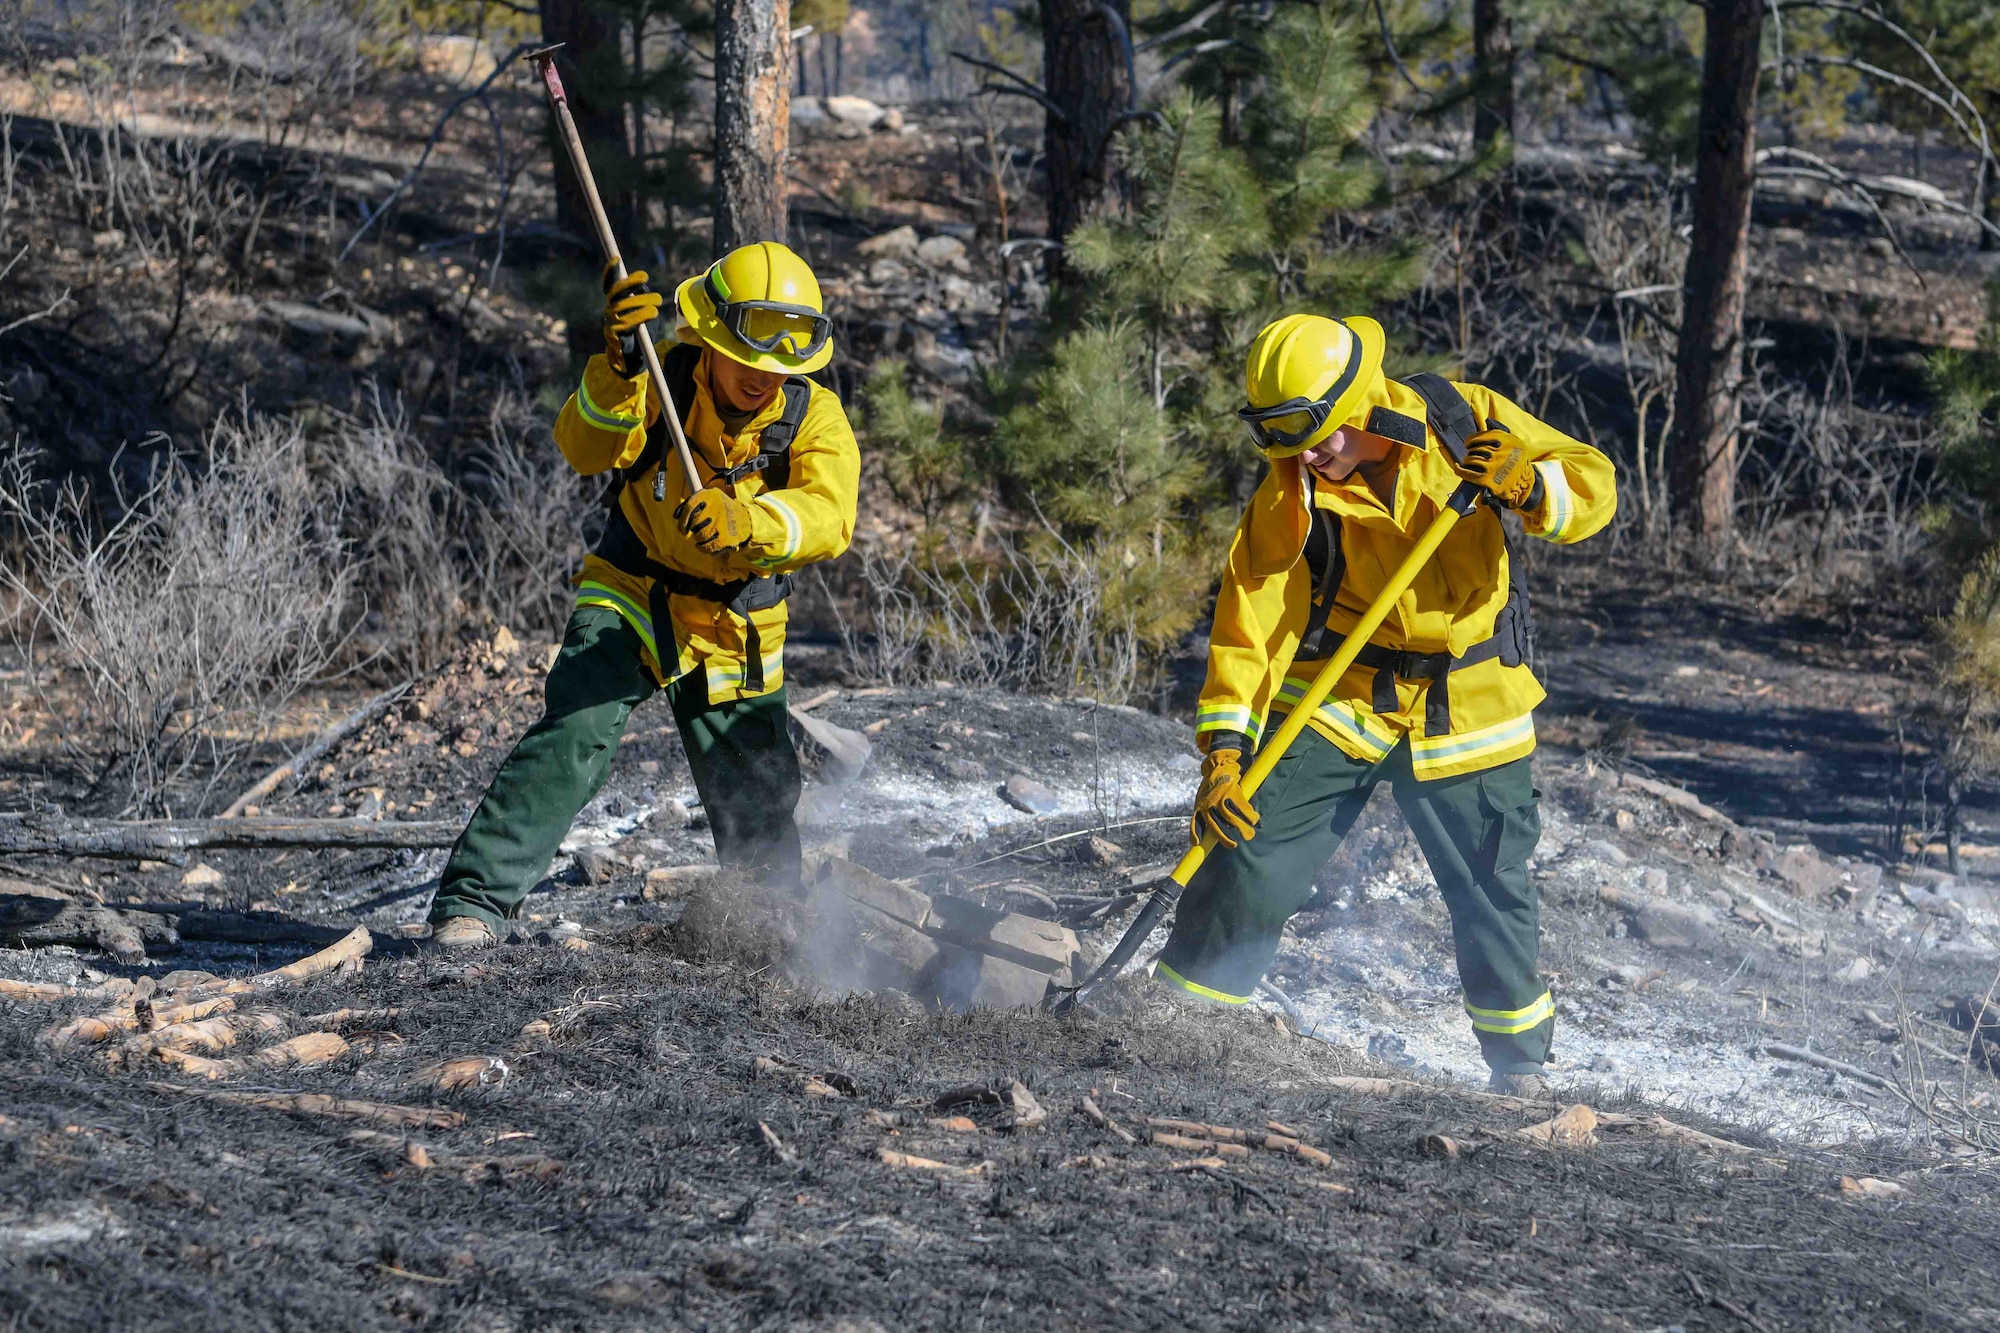 South Dakota National Guard firefighters break up the ground to help alleviate hot spots from Schroeder’s Fire in Rapid City, S.D., March 30, 2021. Several members assigned to the 216th and 451st Firefighting Detachments were called in to help support containment efforts on the ground.